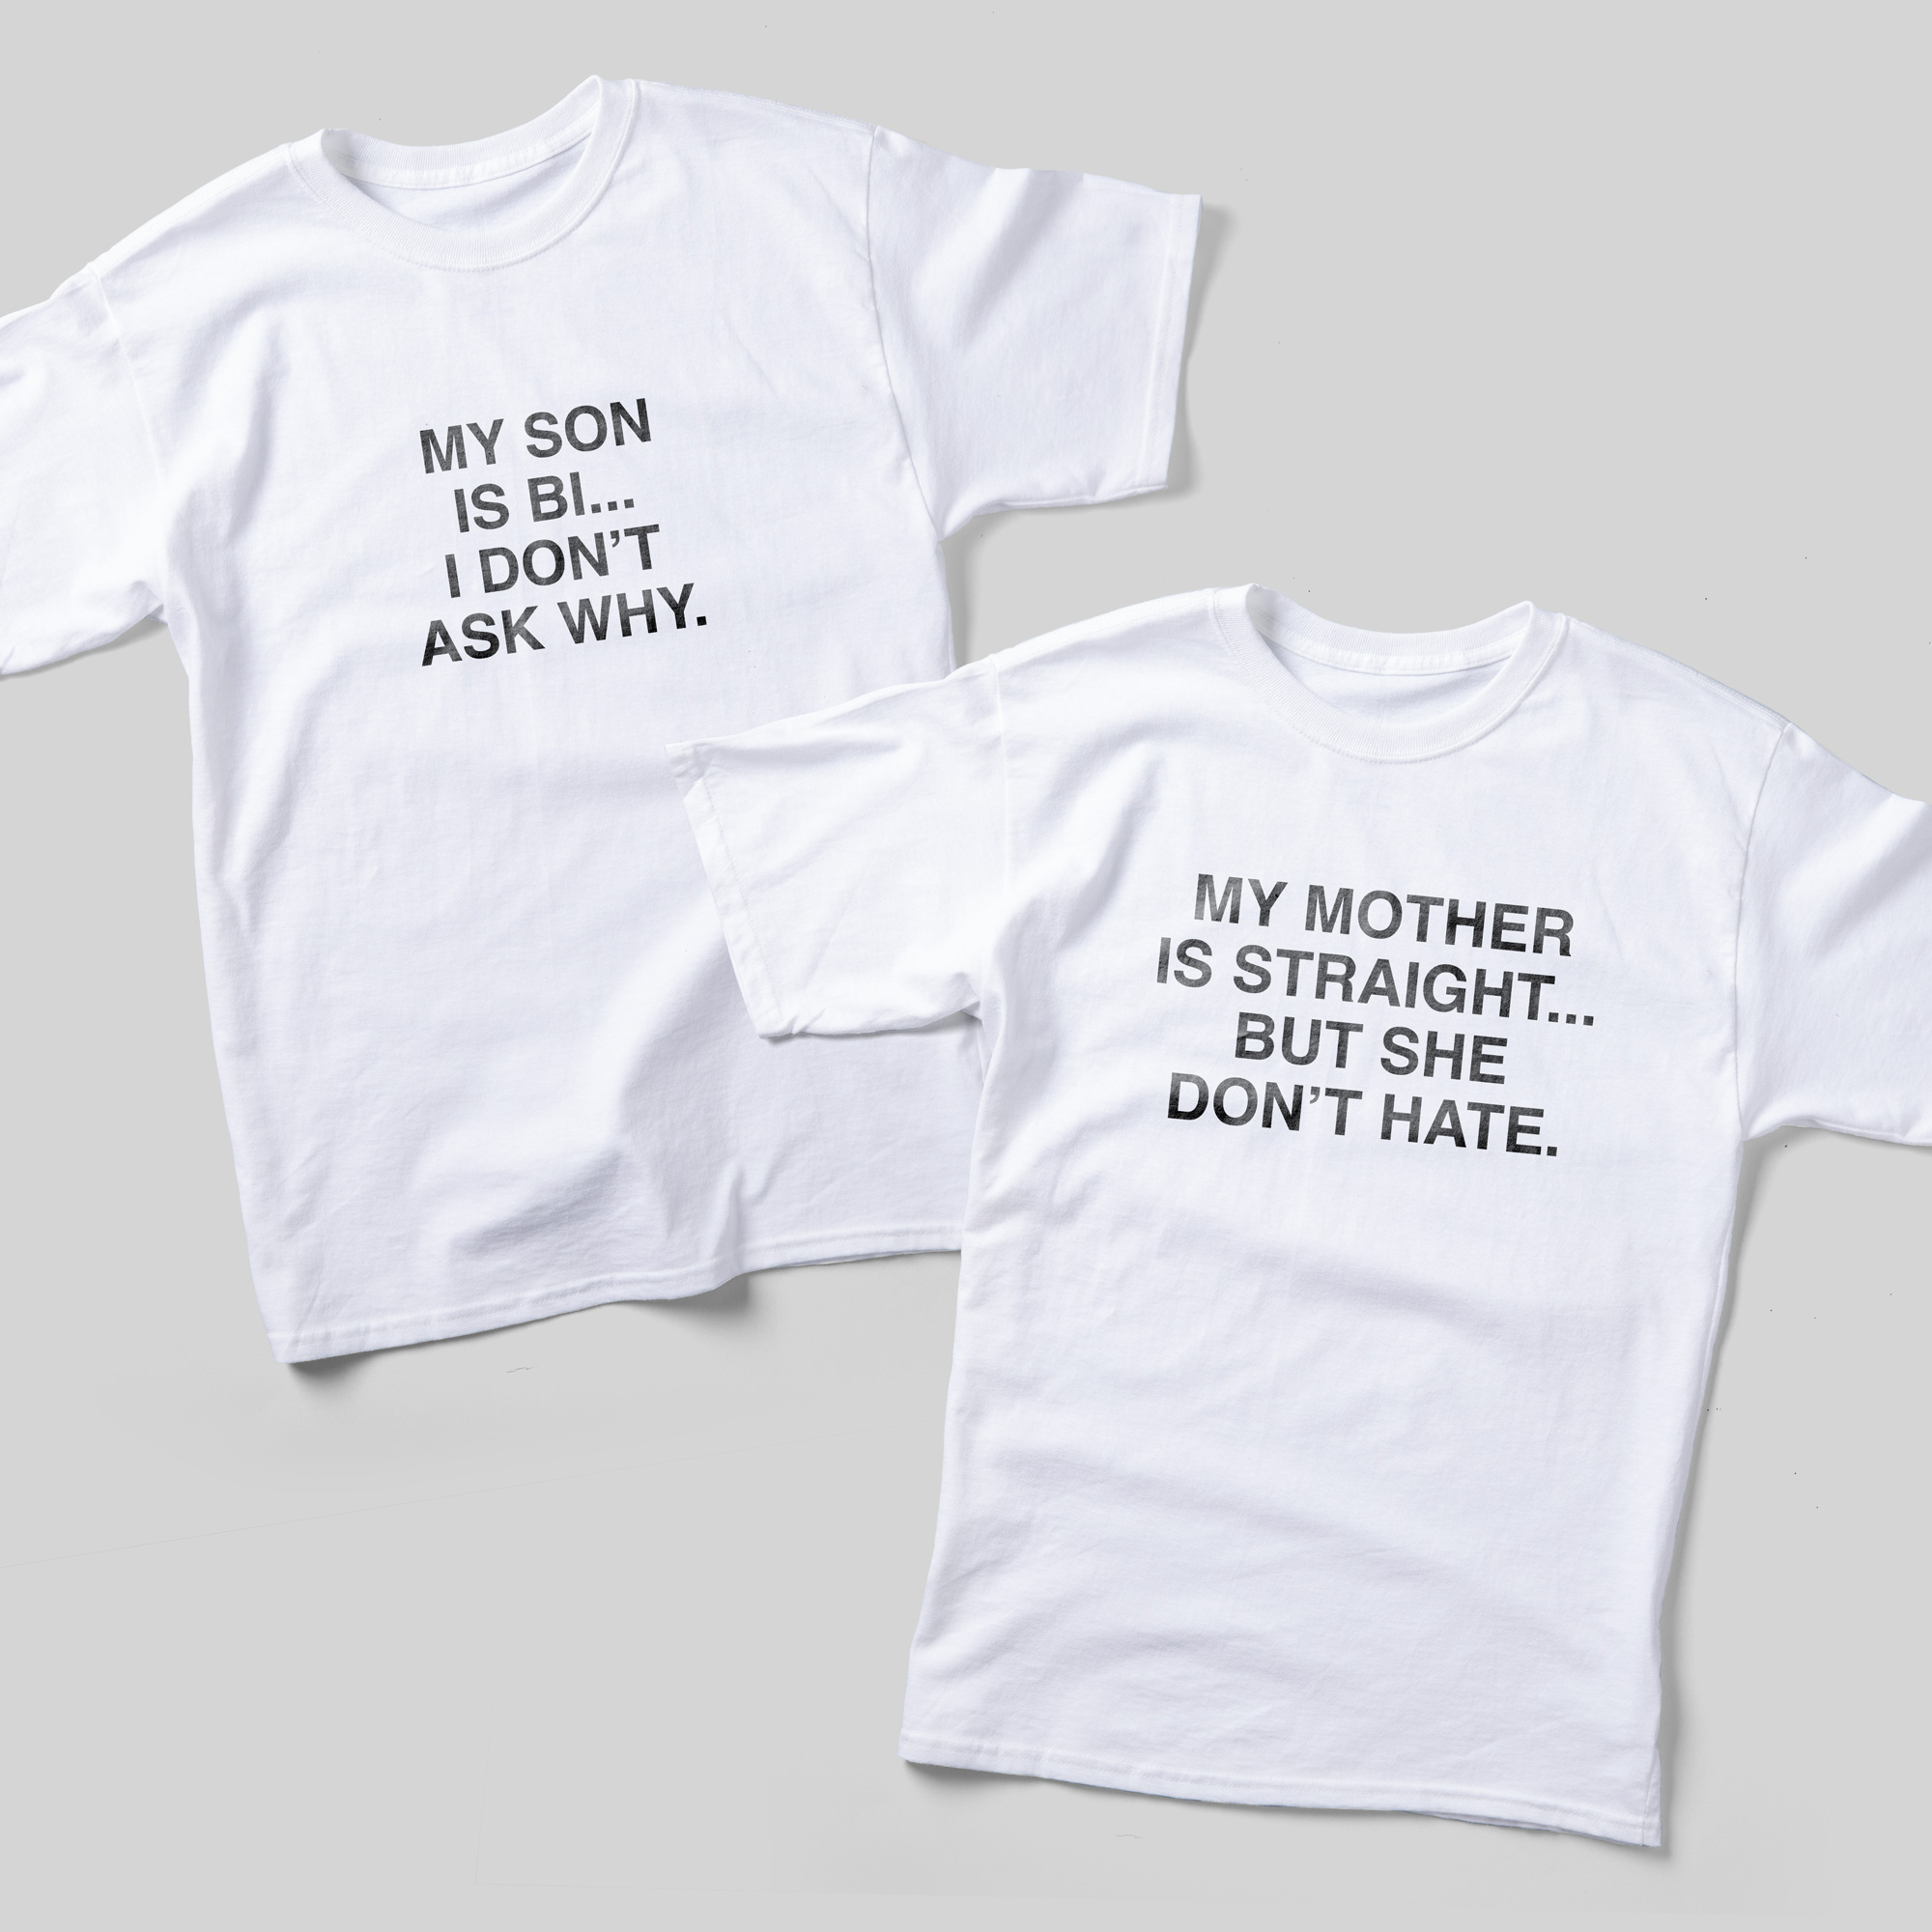 Two white t-shirts laid out together. One t-shirt reads, "My son is bi... I don't ask why." The other reads, "My mother is straight... but she don't hate."